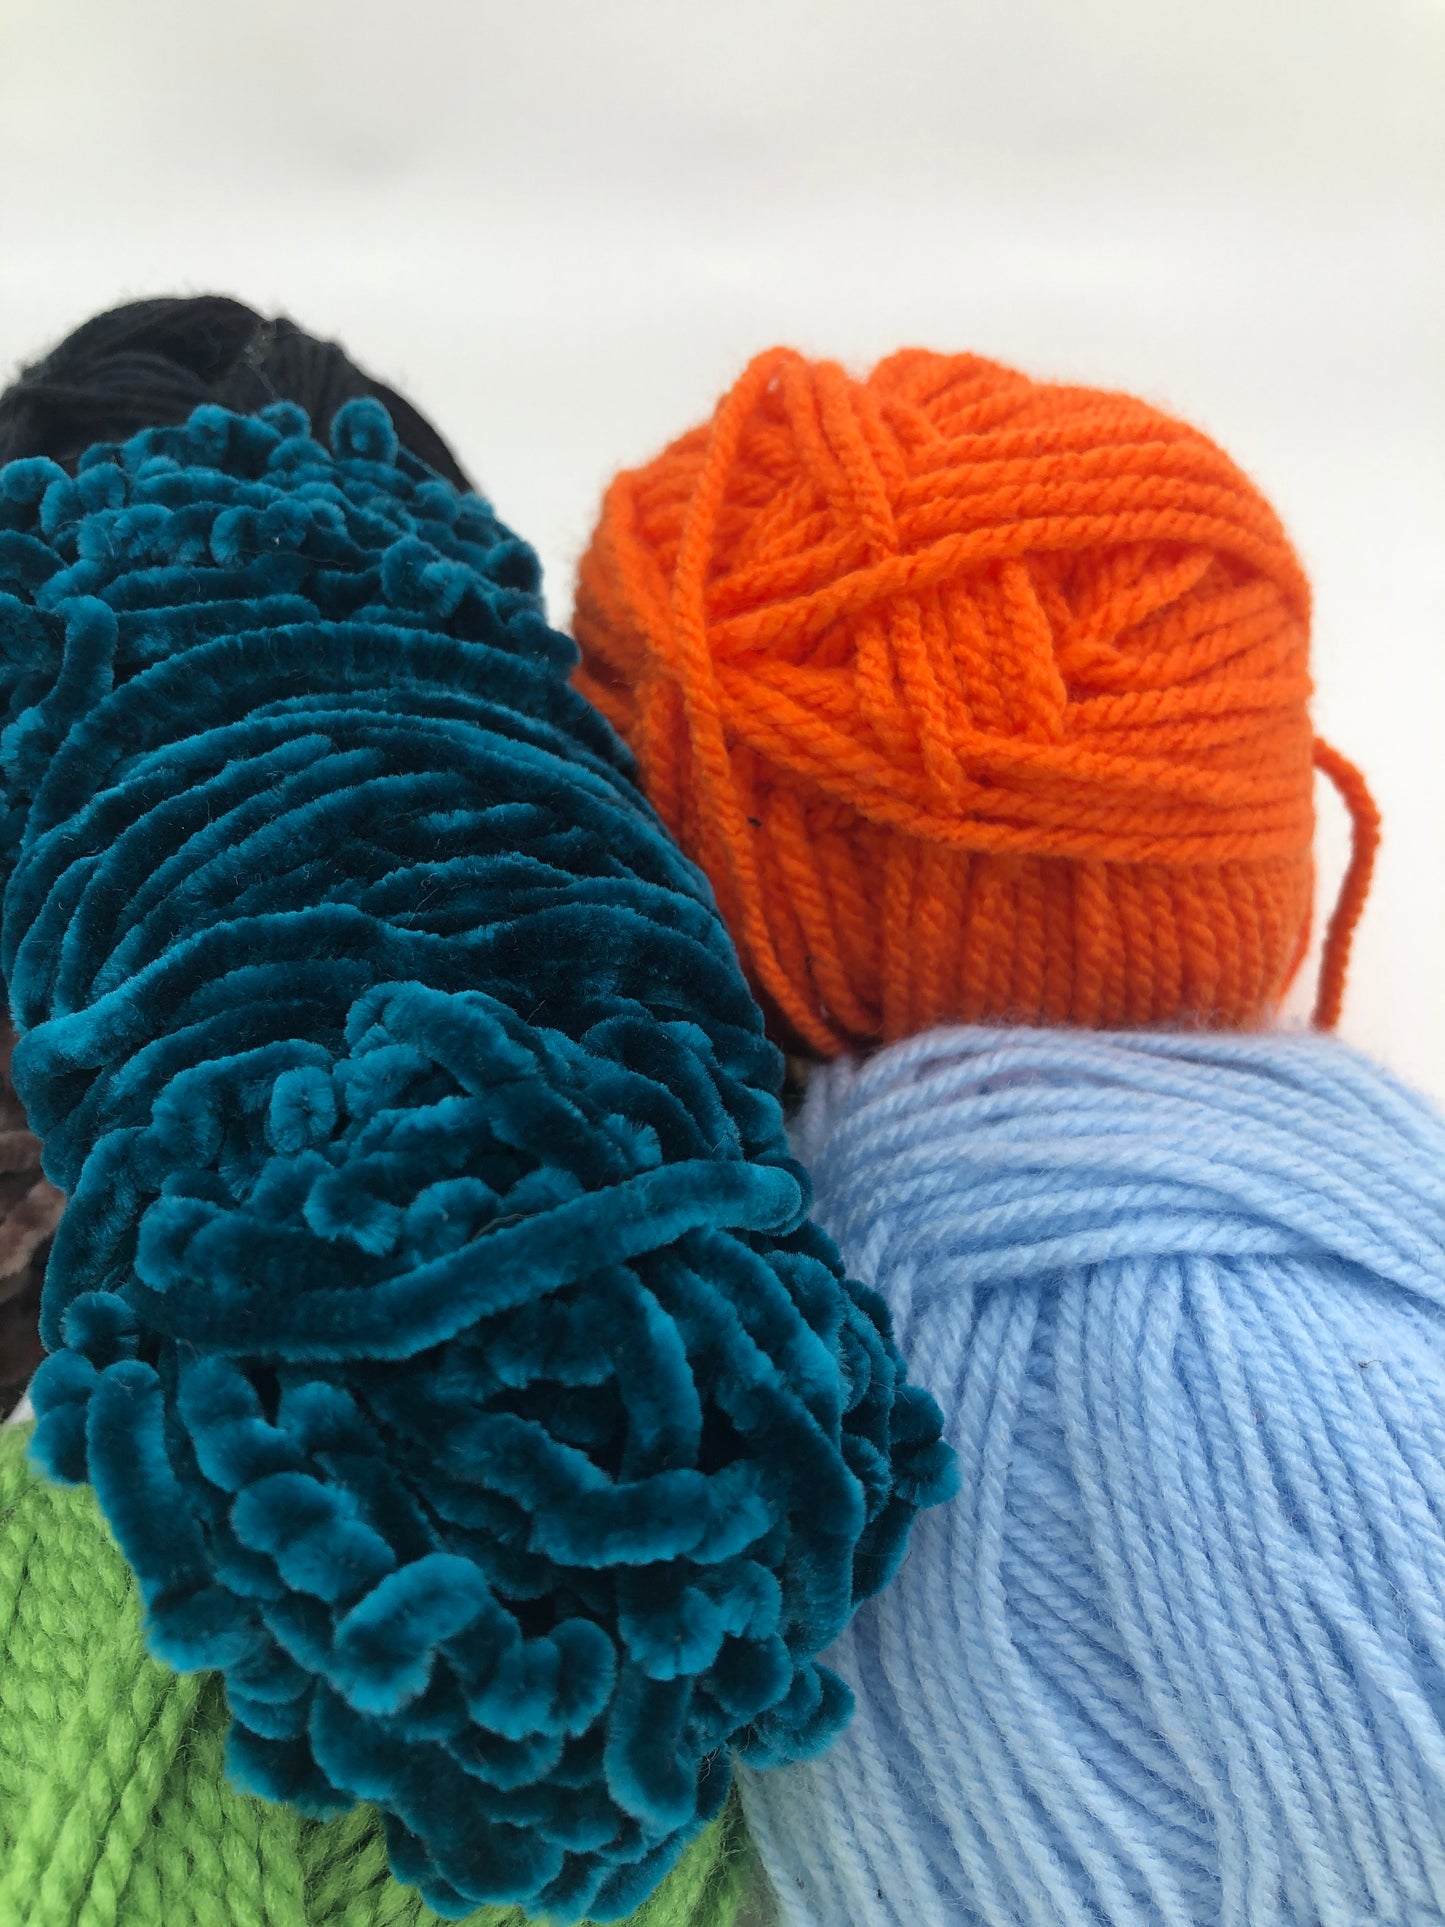 Yarn Skeins, Mixed Colours and Weight